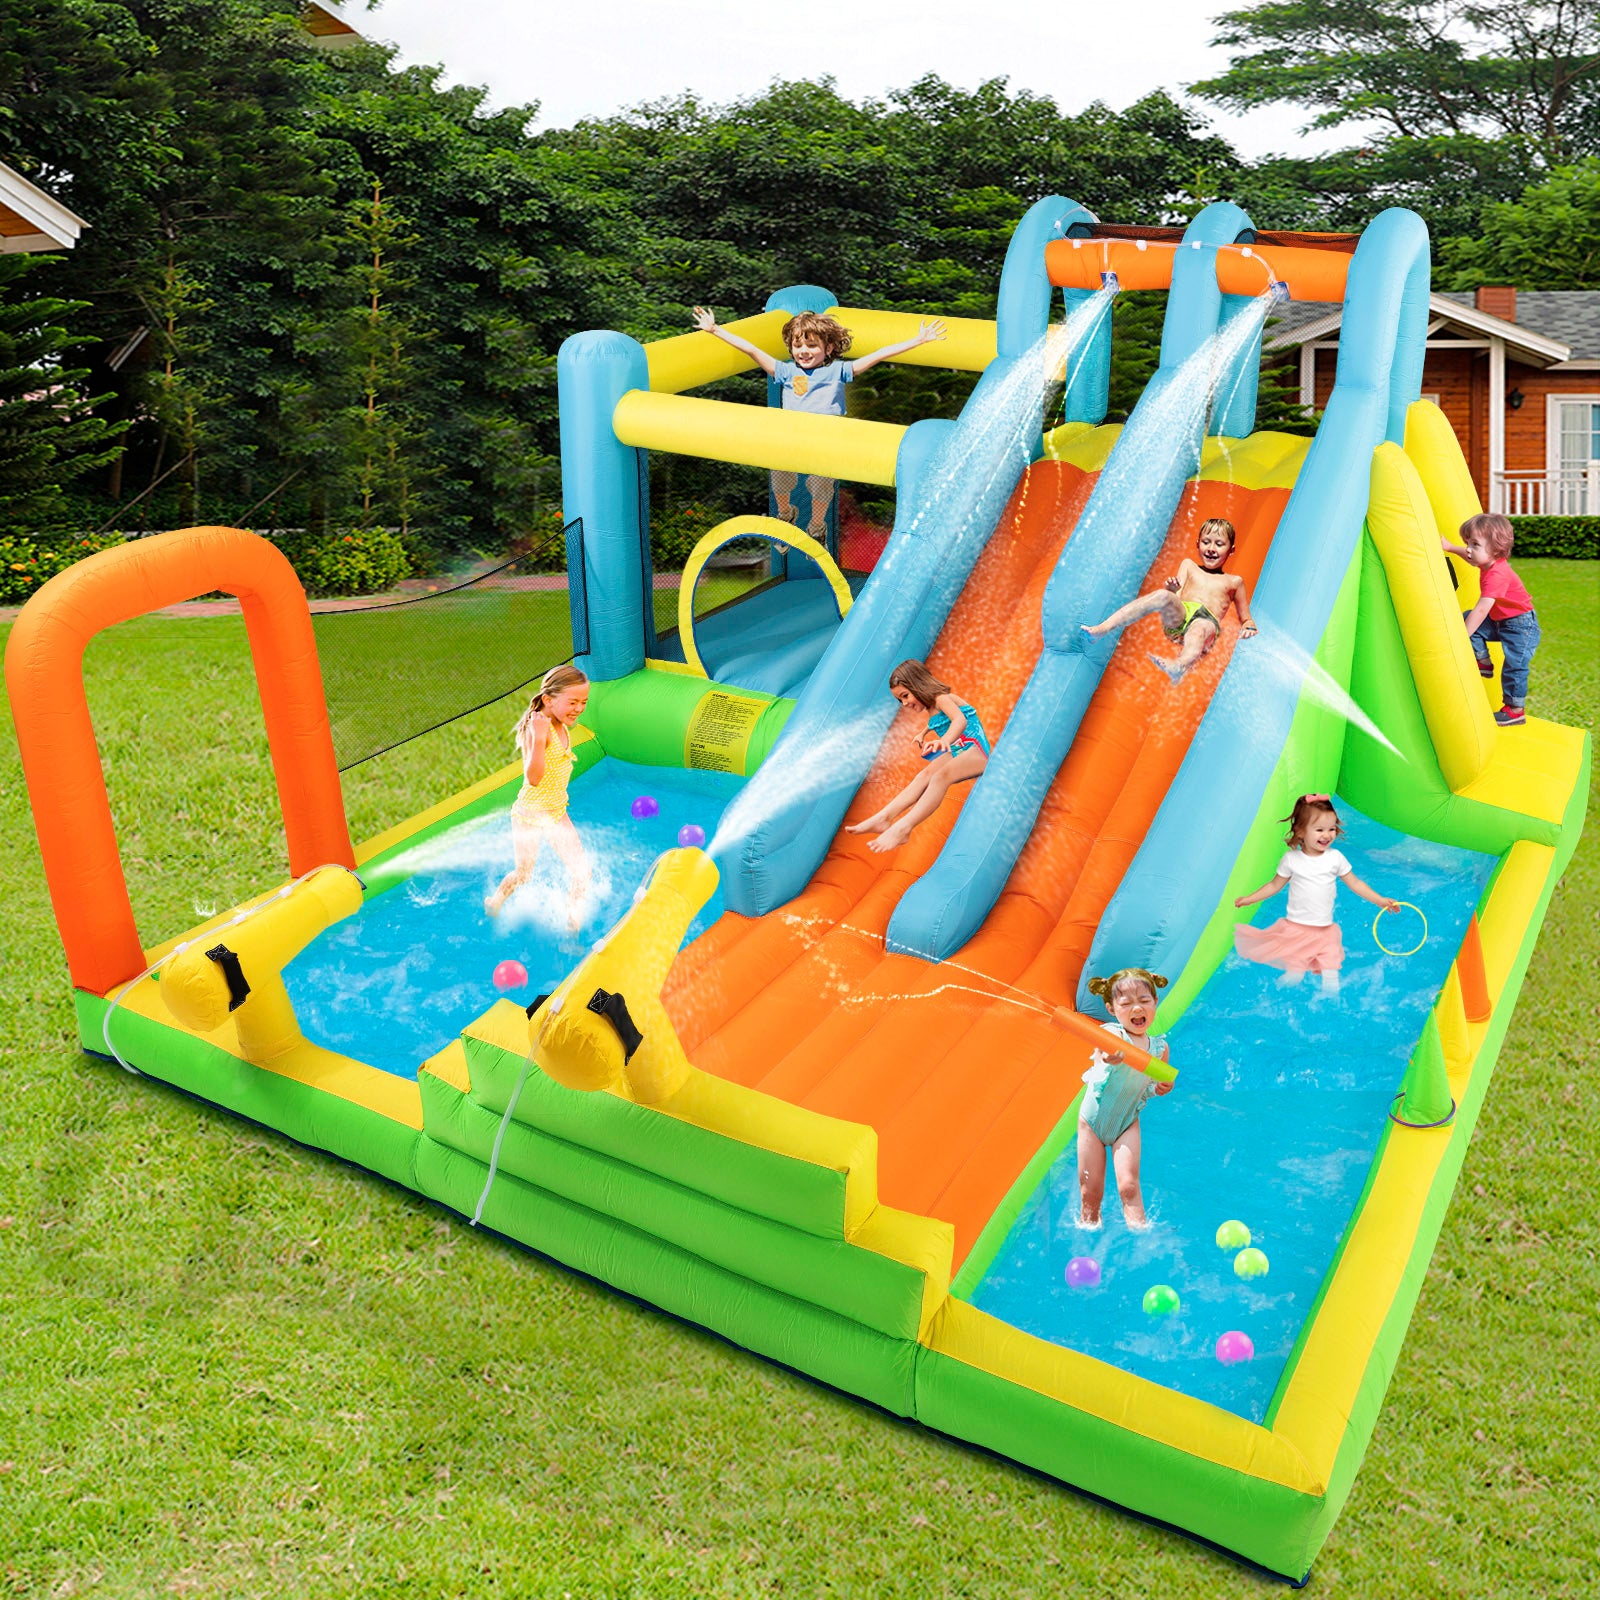 #1204 Inflatable Water Slide, Giant Water Park Bounce House with 2 Long Slides, Splash Pool,Trampoline, Climbing Wall, Ring Toss Game, 550W Air Blower for Kids Backyard Garden Indoor Outdoor Use